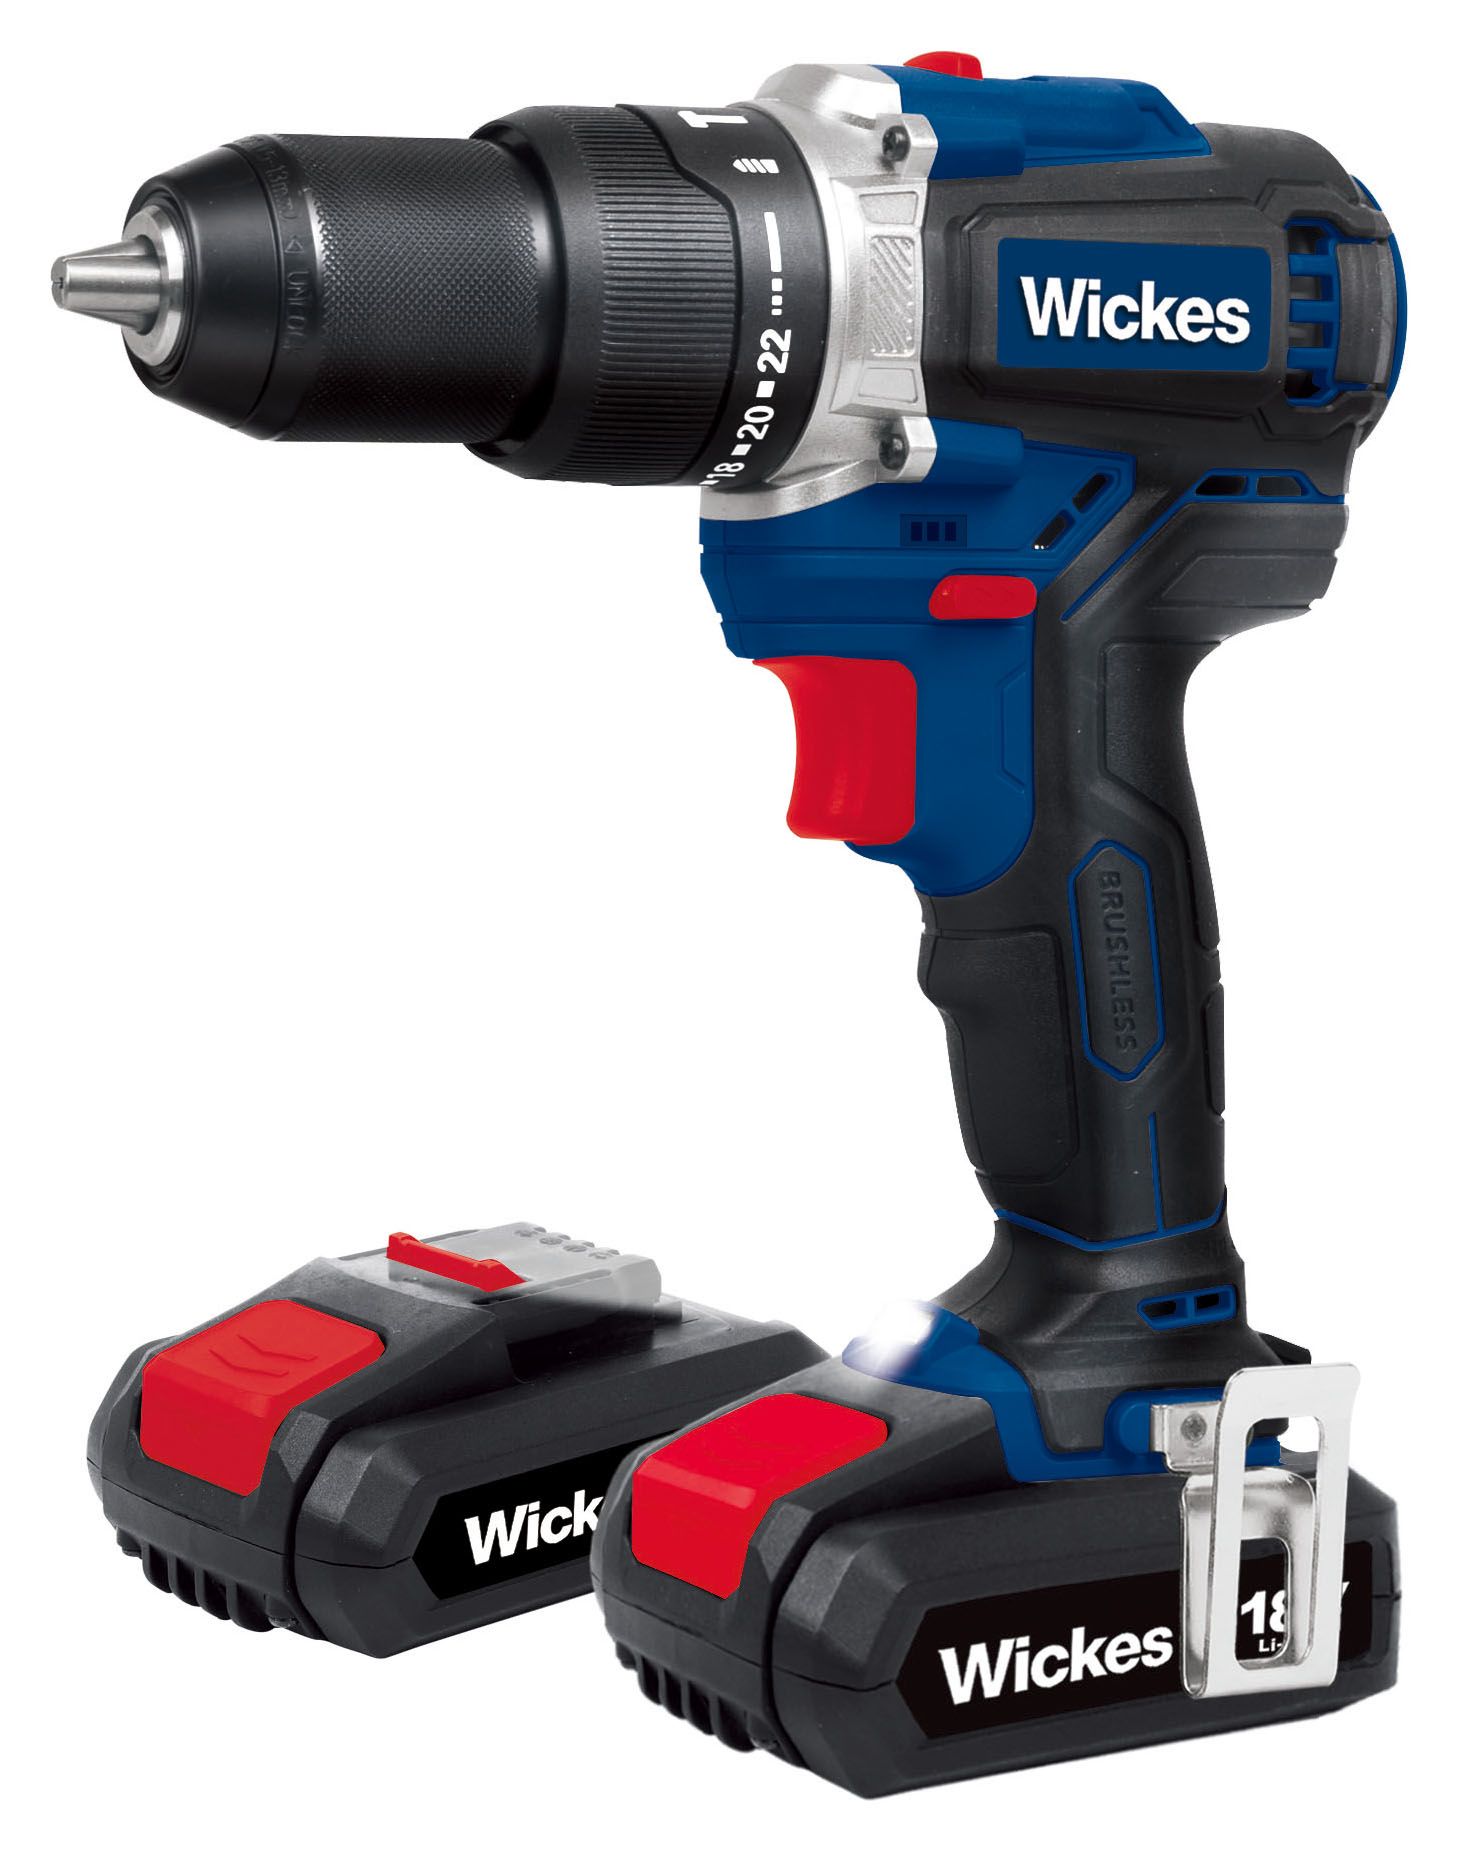 Image of Wickes 18V 2 x 2.0Ah Li-ion Cordless Brushless Combi Drill